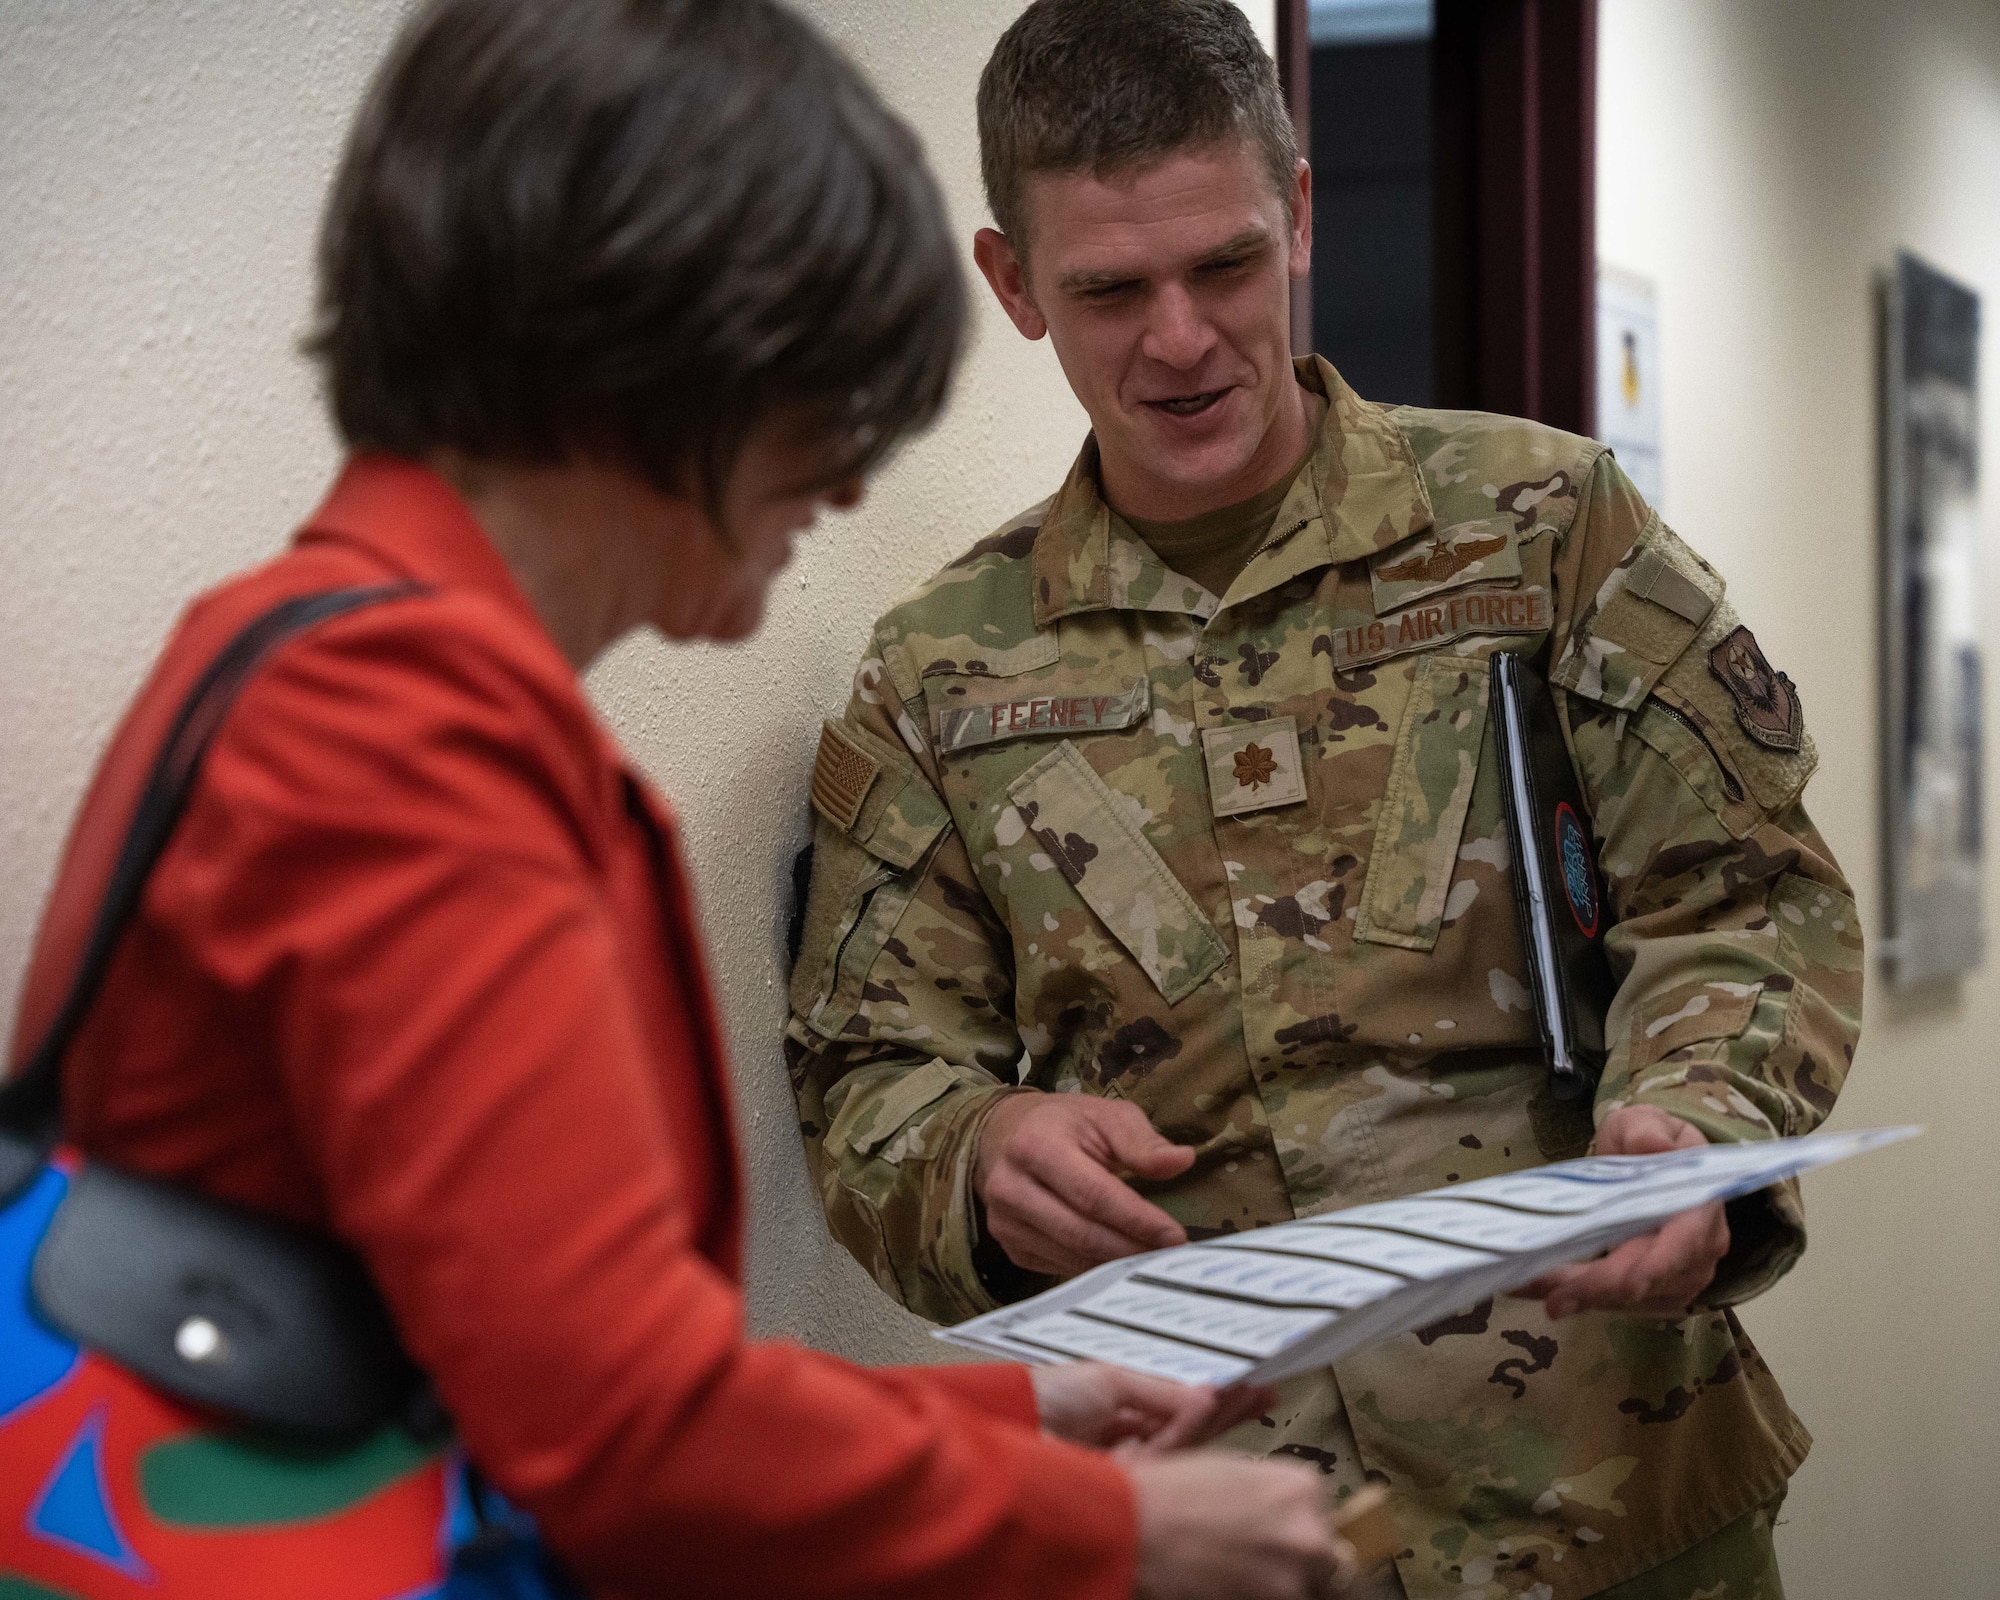 U.S. Air Force Maj. Riley Feeney, 27th Special Operations Wing commander’s action group director, presents the 27 SOW lines of effort placemat to Susan Veazey, Regional Director of the Defense’s Office of Local Defense Community Cooperation, at Cannon Air Force Base, N.M., April 24, 2024. OLDCC, in coordination with other federal agencies, delivers a program that enables states, local governments, and communities to cooperate with their military installations and leverage public and private capabilities and deliver public infrastructure and services to enhance the military mission, achieve savings, and reduce operating cost. (U.S. Air Force photo by Senior Airman Parra)